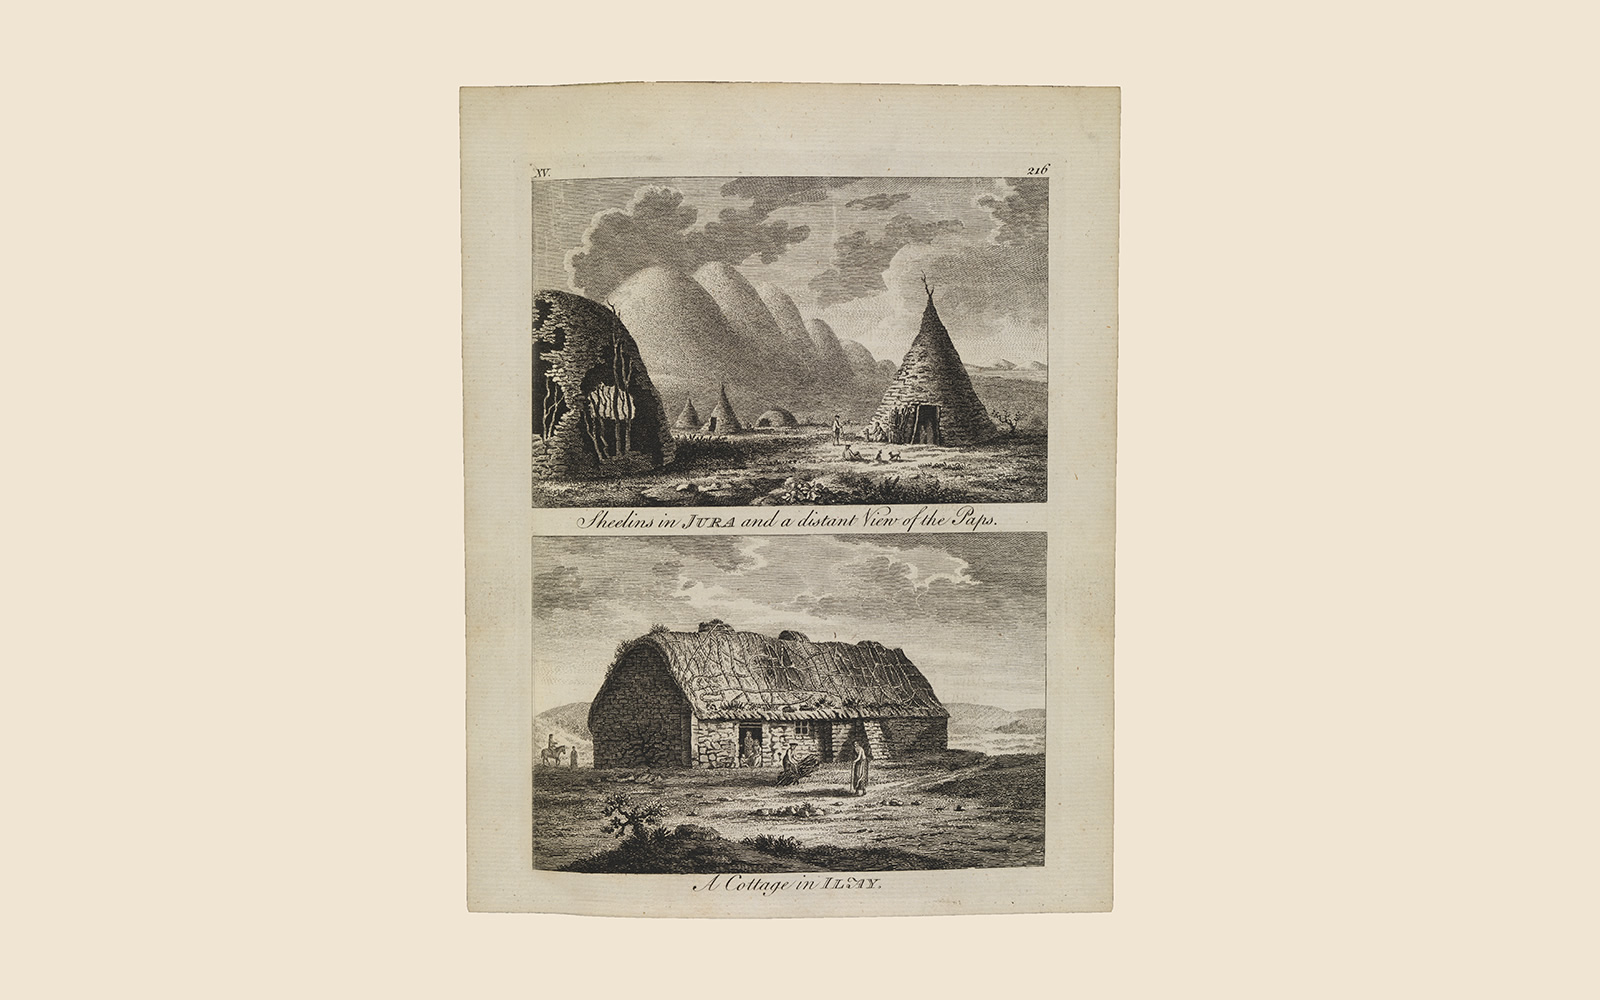 Moses Griffith, 'Sheelins [Shieling Huts] in Jura, and a distant view of the Paps